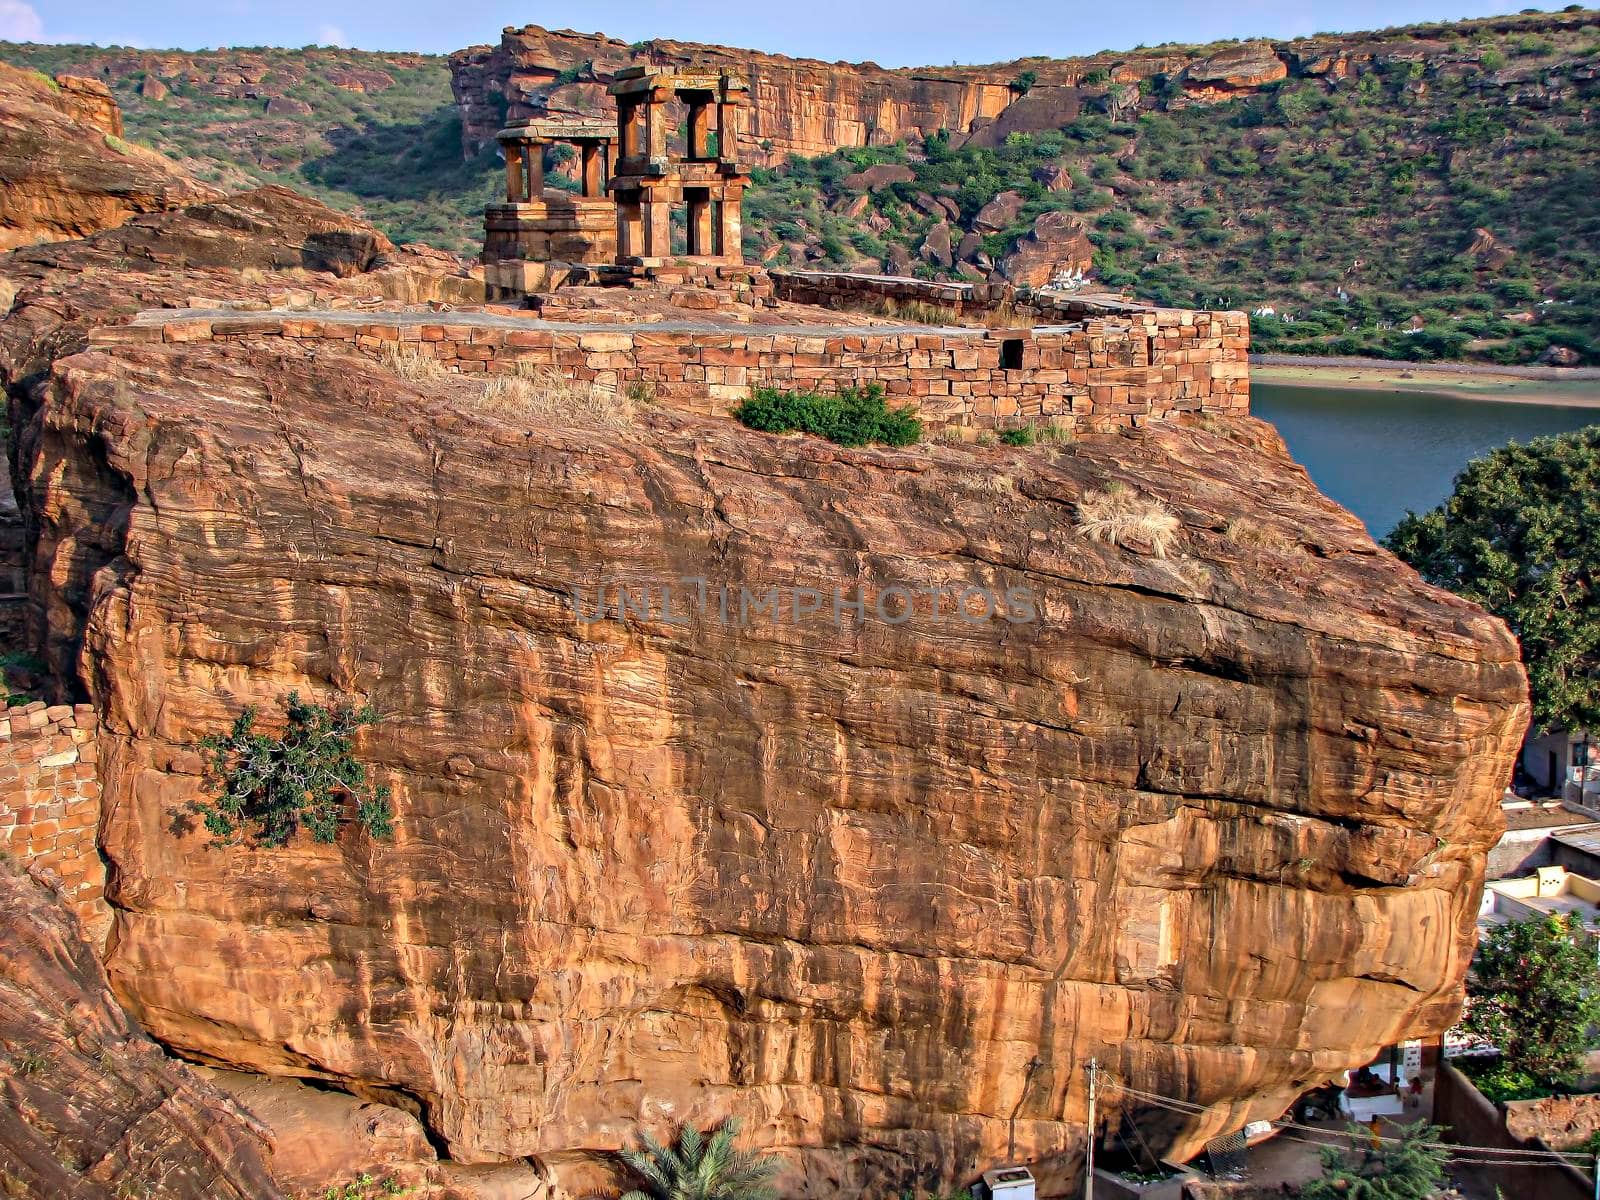 Ancient , two storied observation tower in Badami fort, Karnataka, India.